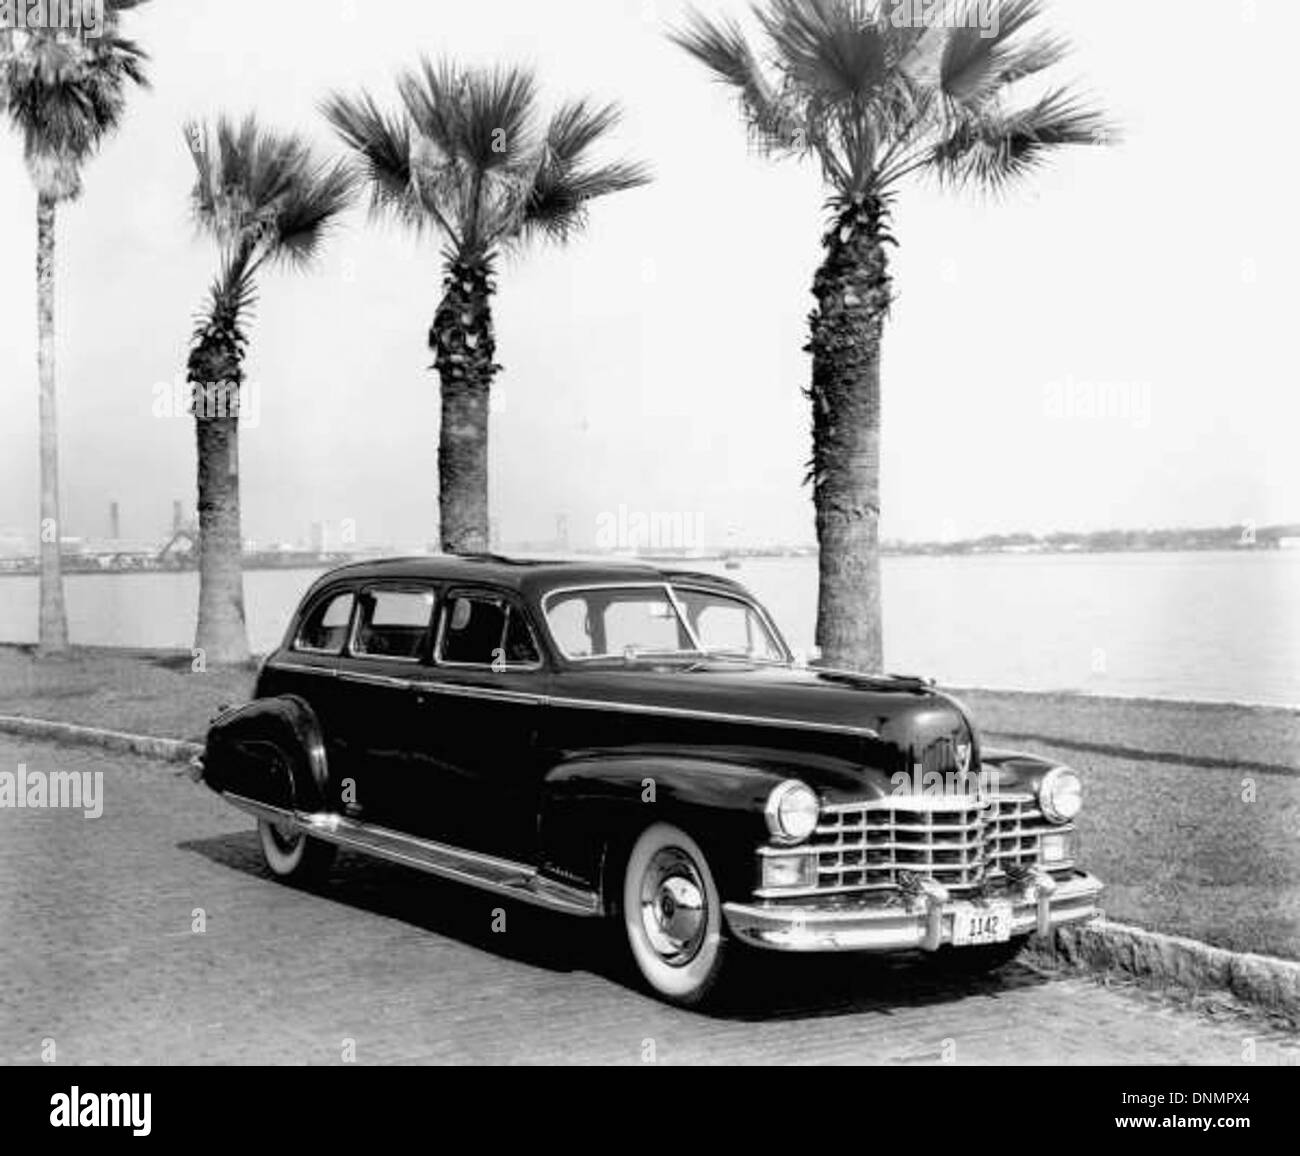 Unidentified car parked near the St. Johns River in Jacksonville, Florida Stock Photo